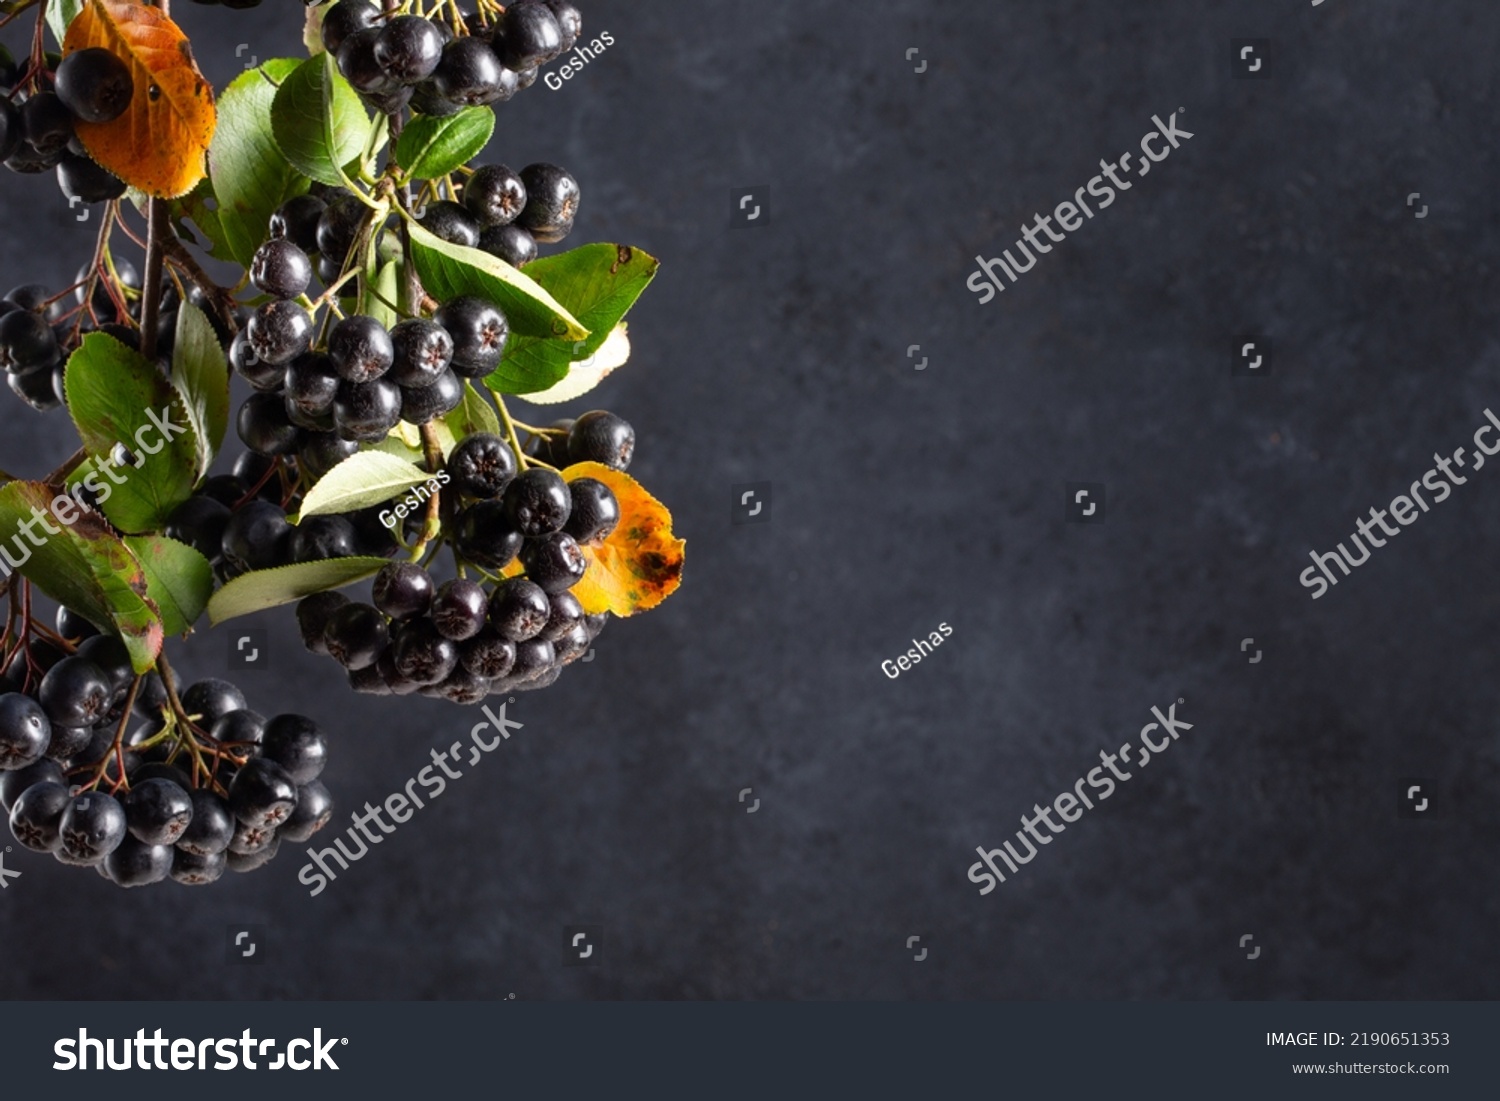 Chokeberry, aronia melanocarpa. Branches of black chokeberry with berries and leaves against black background. Copy space. #2190651353